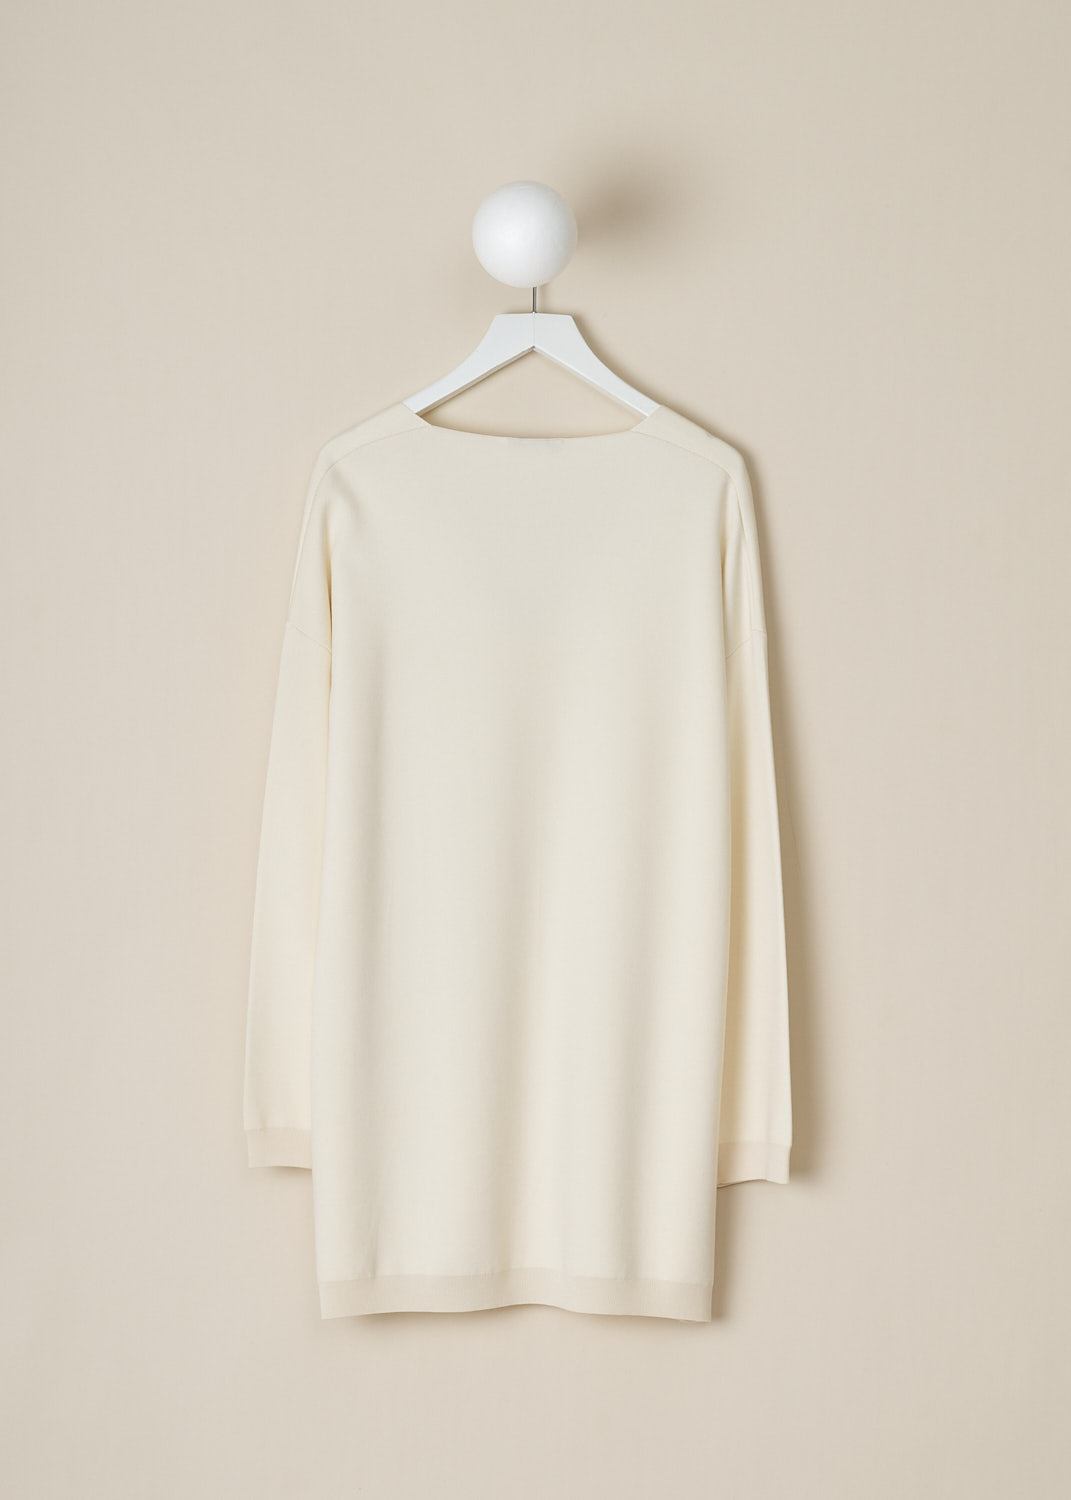 THE ROW, IVORY WHITE OVERSIZED MIRU TOP, MIRU_TOP_3227FI_BQ_IVORY, White, Back, This ivory white oversized Miru top has a deep V-neckline. The long sleeves have dropped shoulders and ribbed cuffs. The top has a straight, ribbed hemline. 
